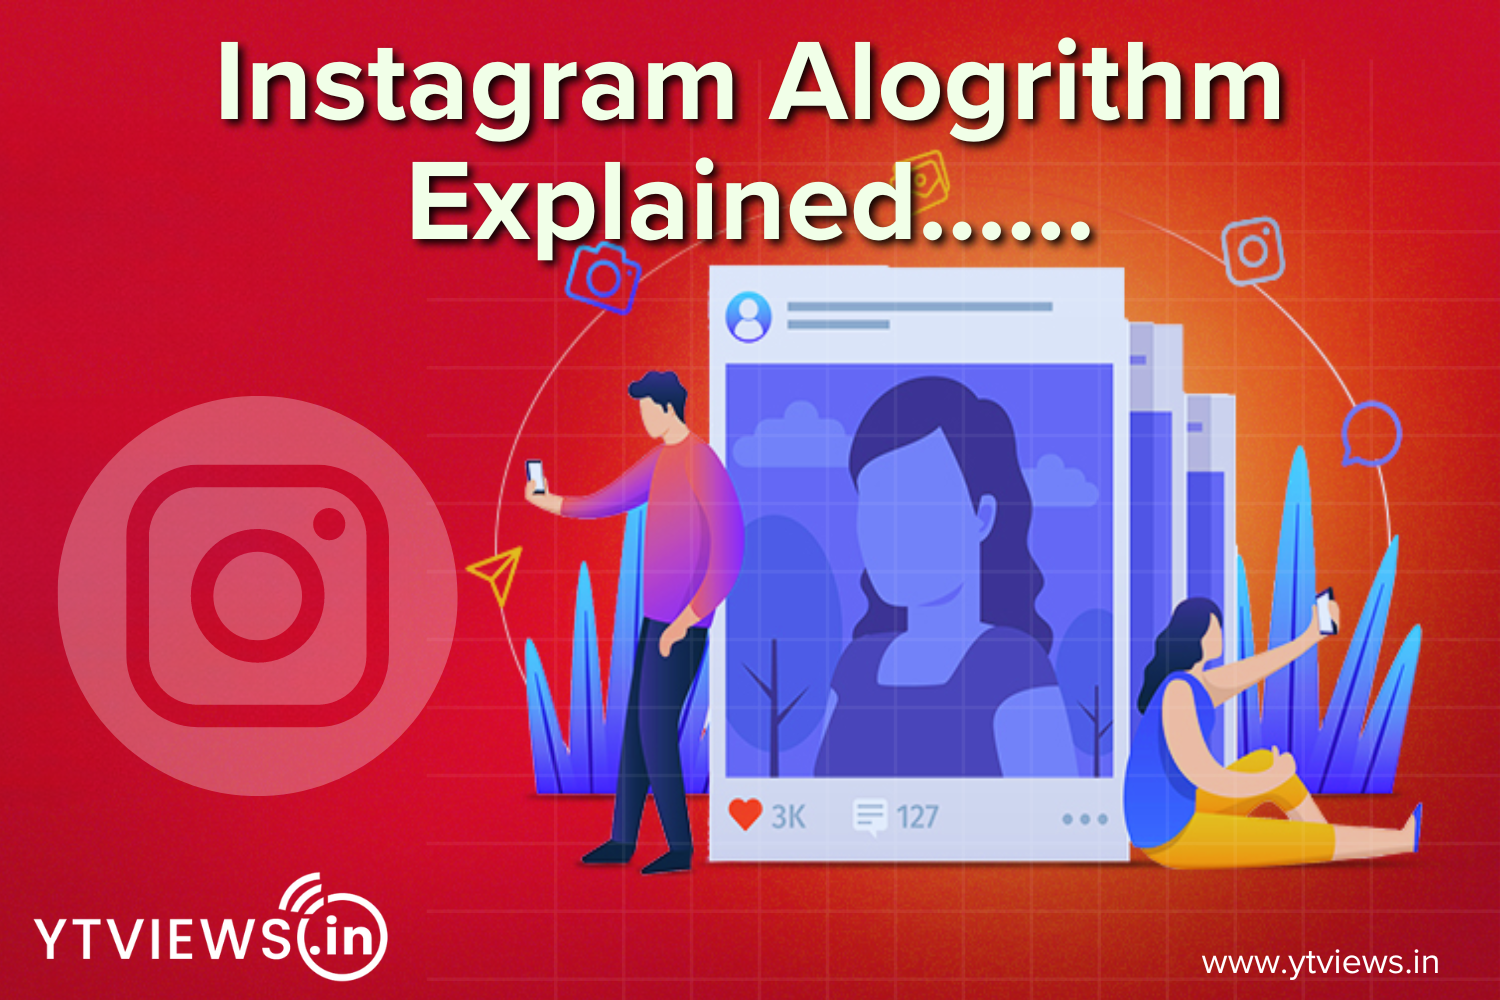 Instagram CEO finally showers light on how the Instagram algorithm works for reels, stories and explore.